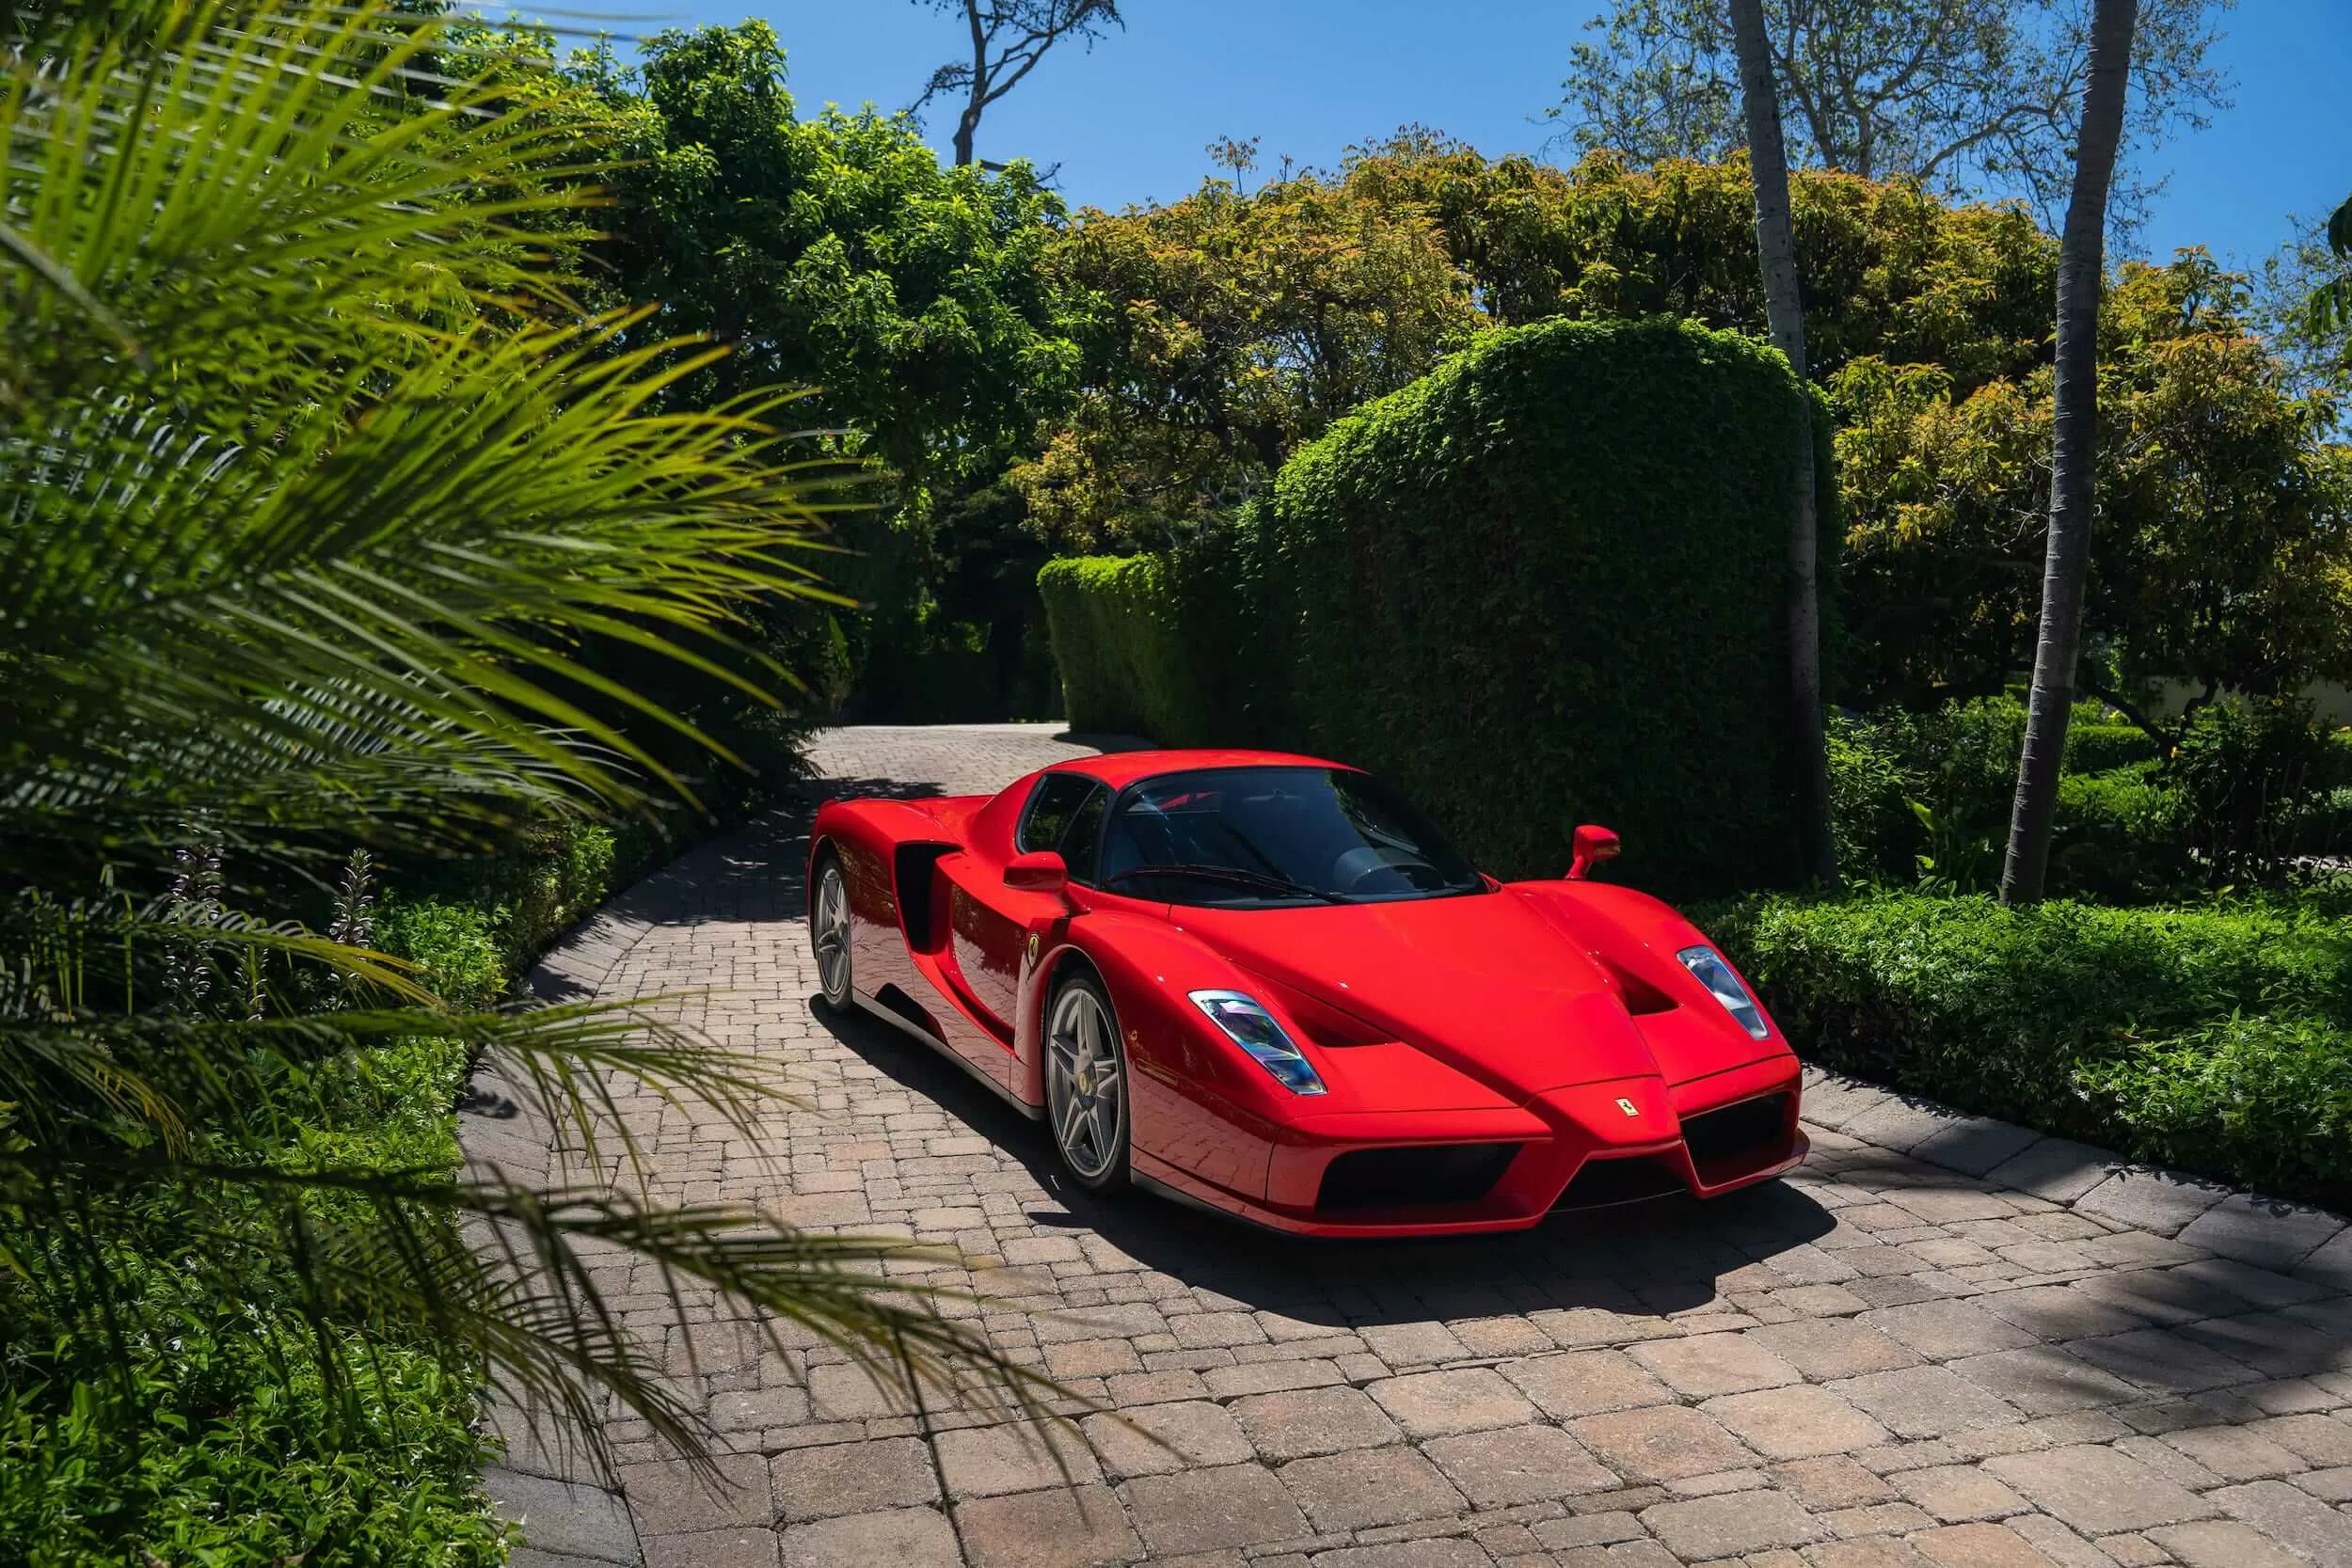 Mint Ferrari Enzo sets record for most expensive car ever sold in online auction